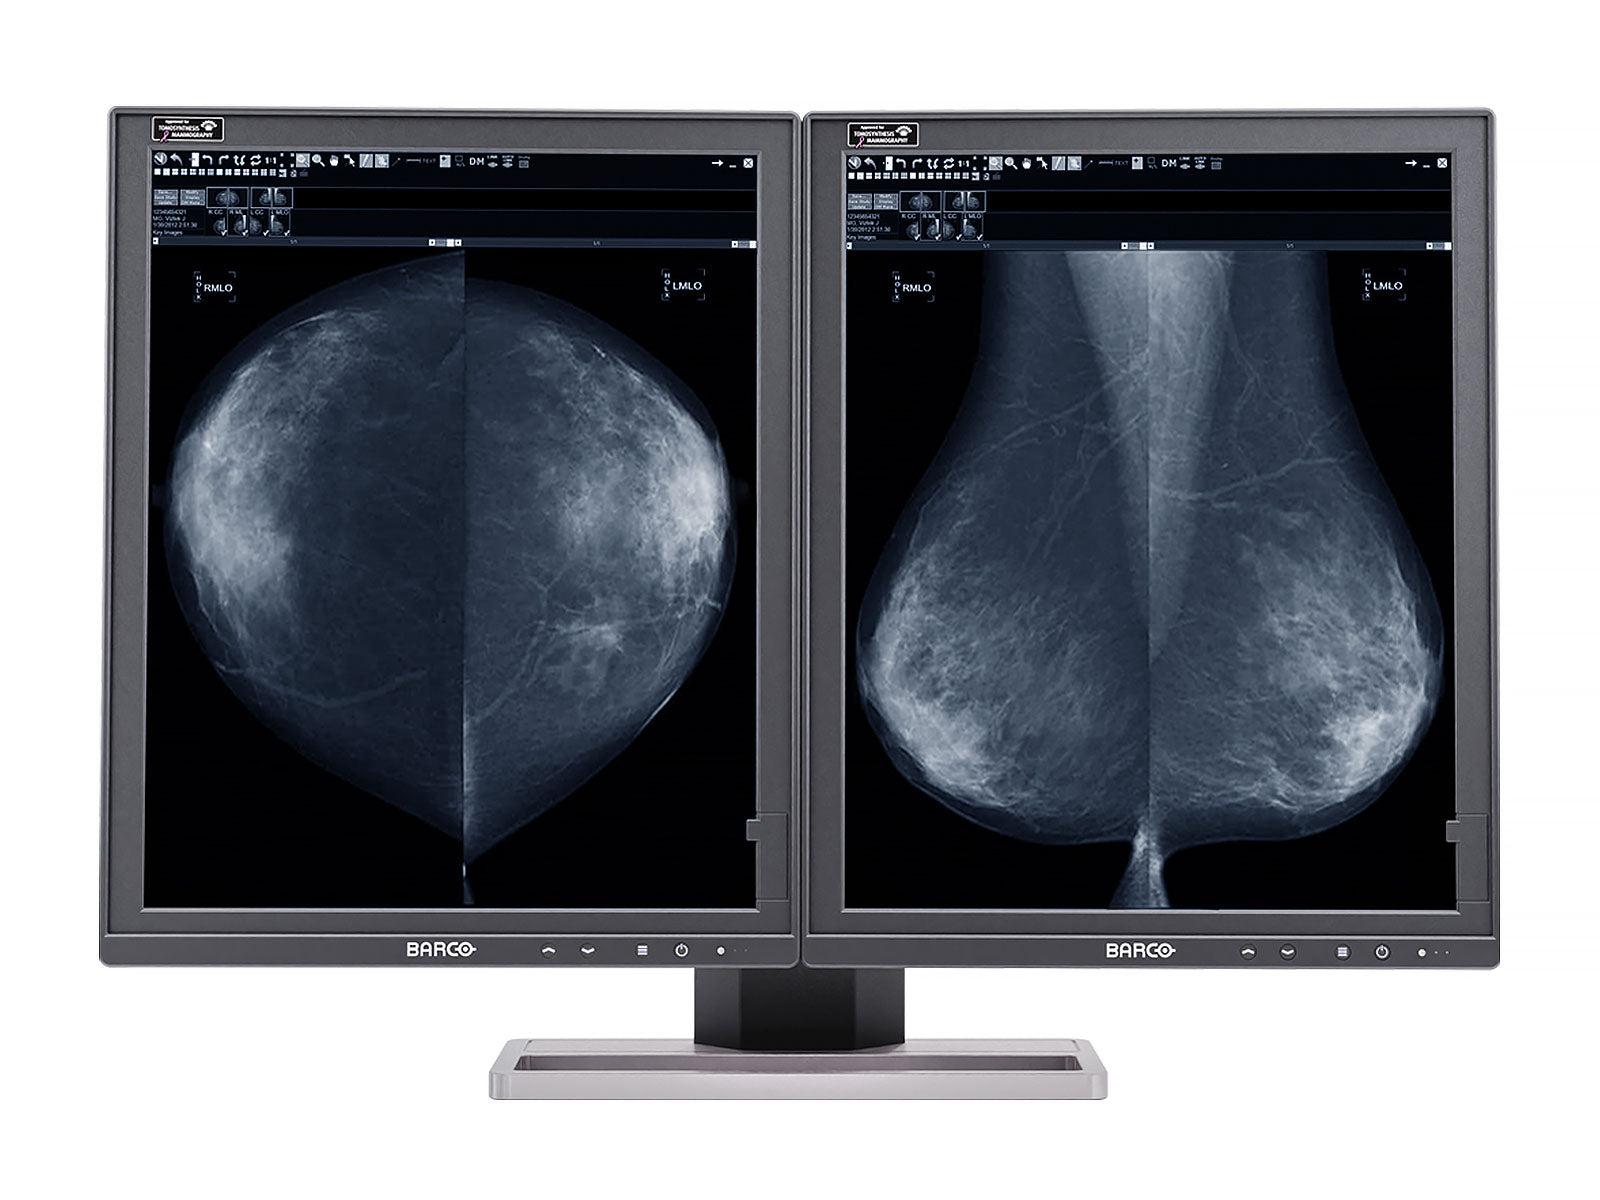 Barco Coronis MDMG-5221 5MP 21.3" Grayscale Tomosynthesis LED 3D-DBT Mammography Display